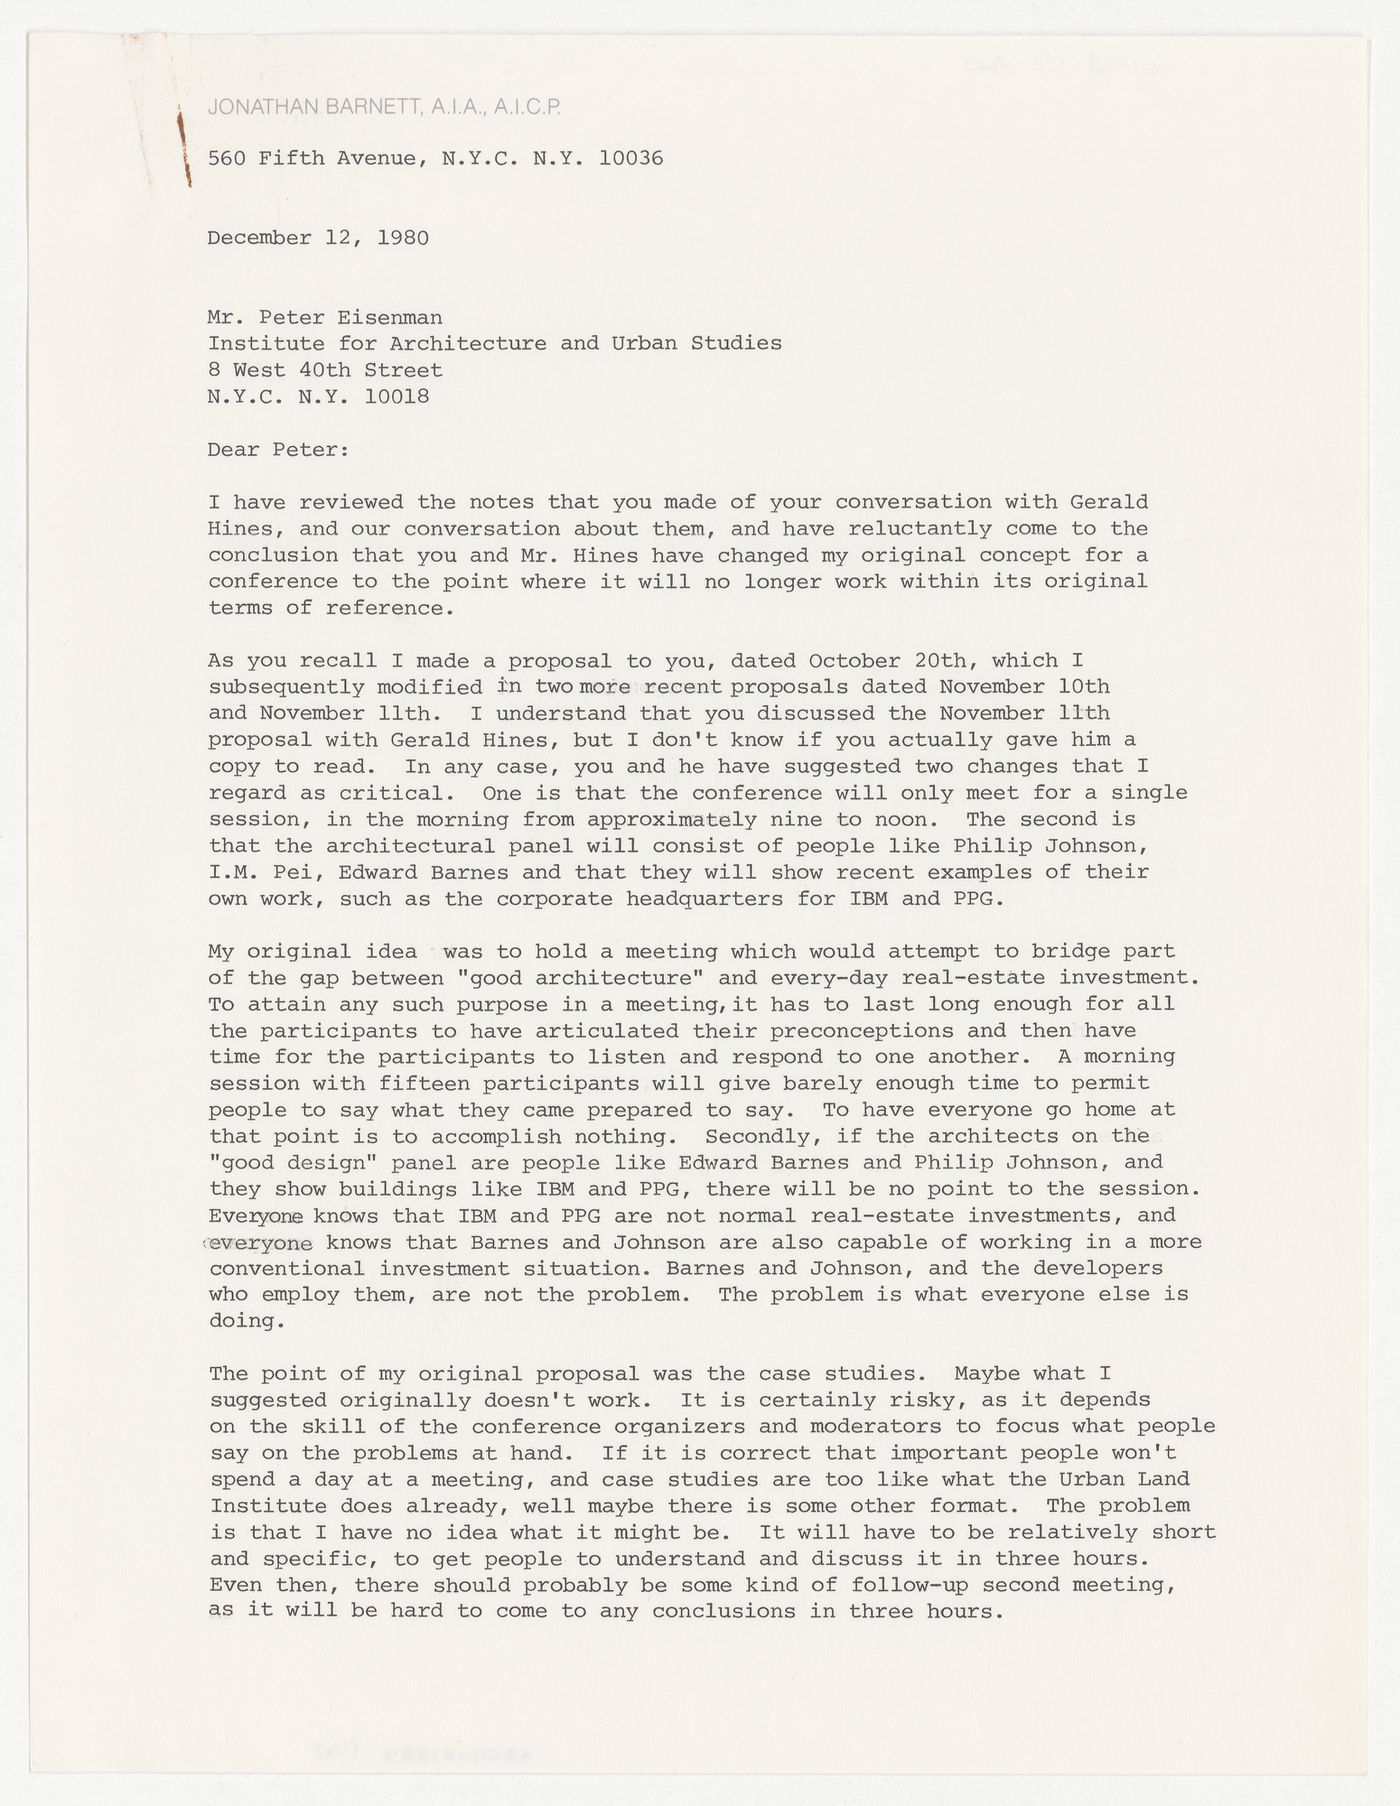 Letter from Jonathan Barnett to Peter D. Eisenman responding to a collaboration request